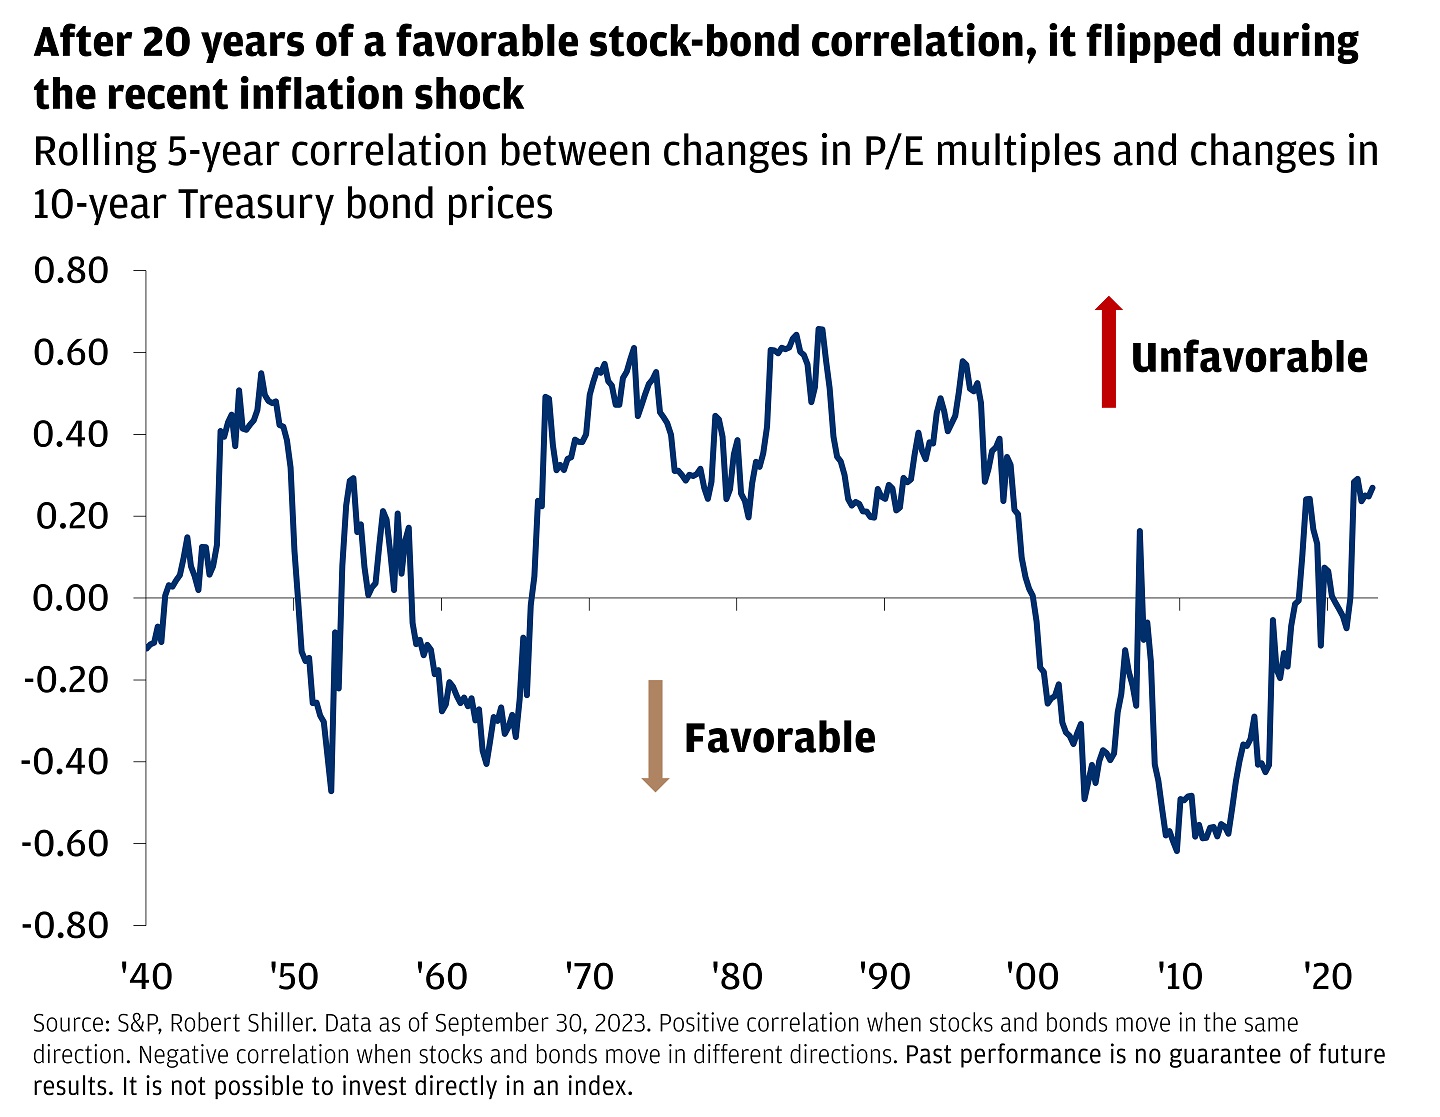 The chart describes rolling 5-year correlation between changes in P/E multiples and changes in 10-year Treasury bond prices.